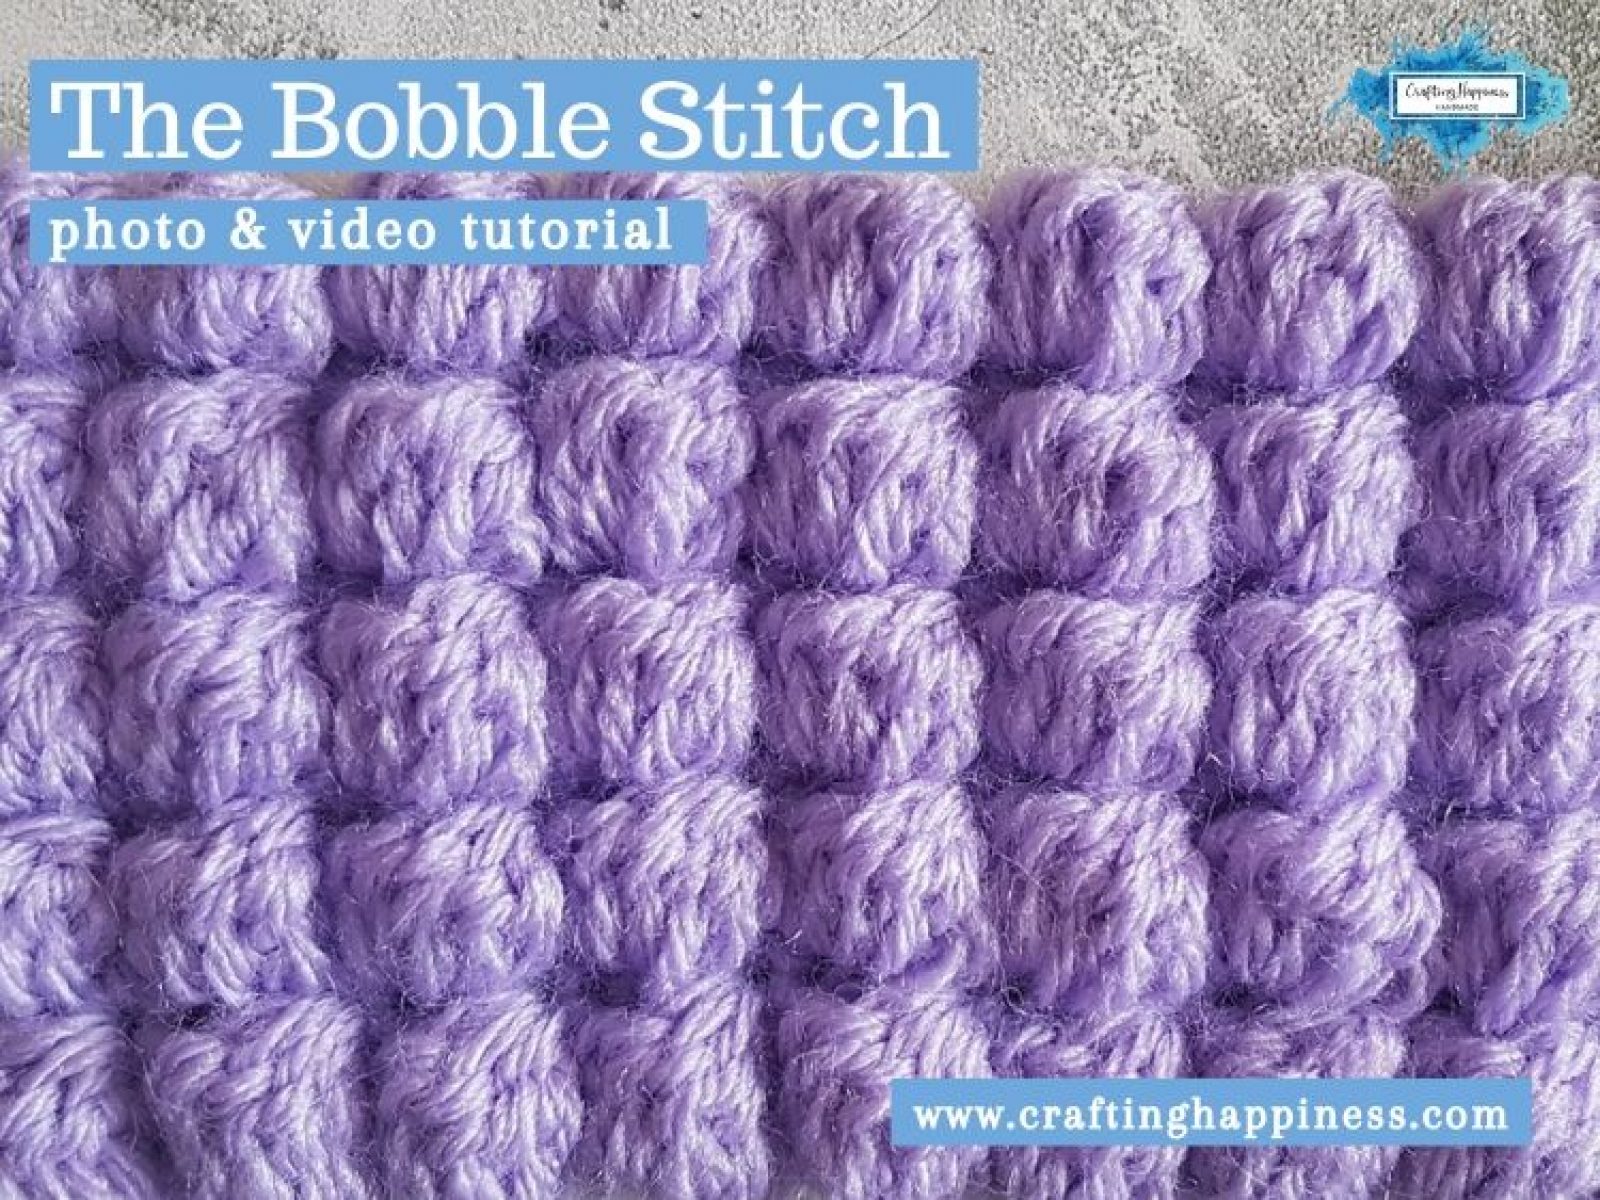 The Bobble Stitch by Crafting Happiness FACEBOOK POSTER